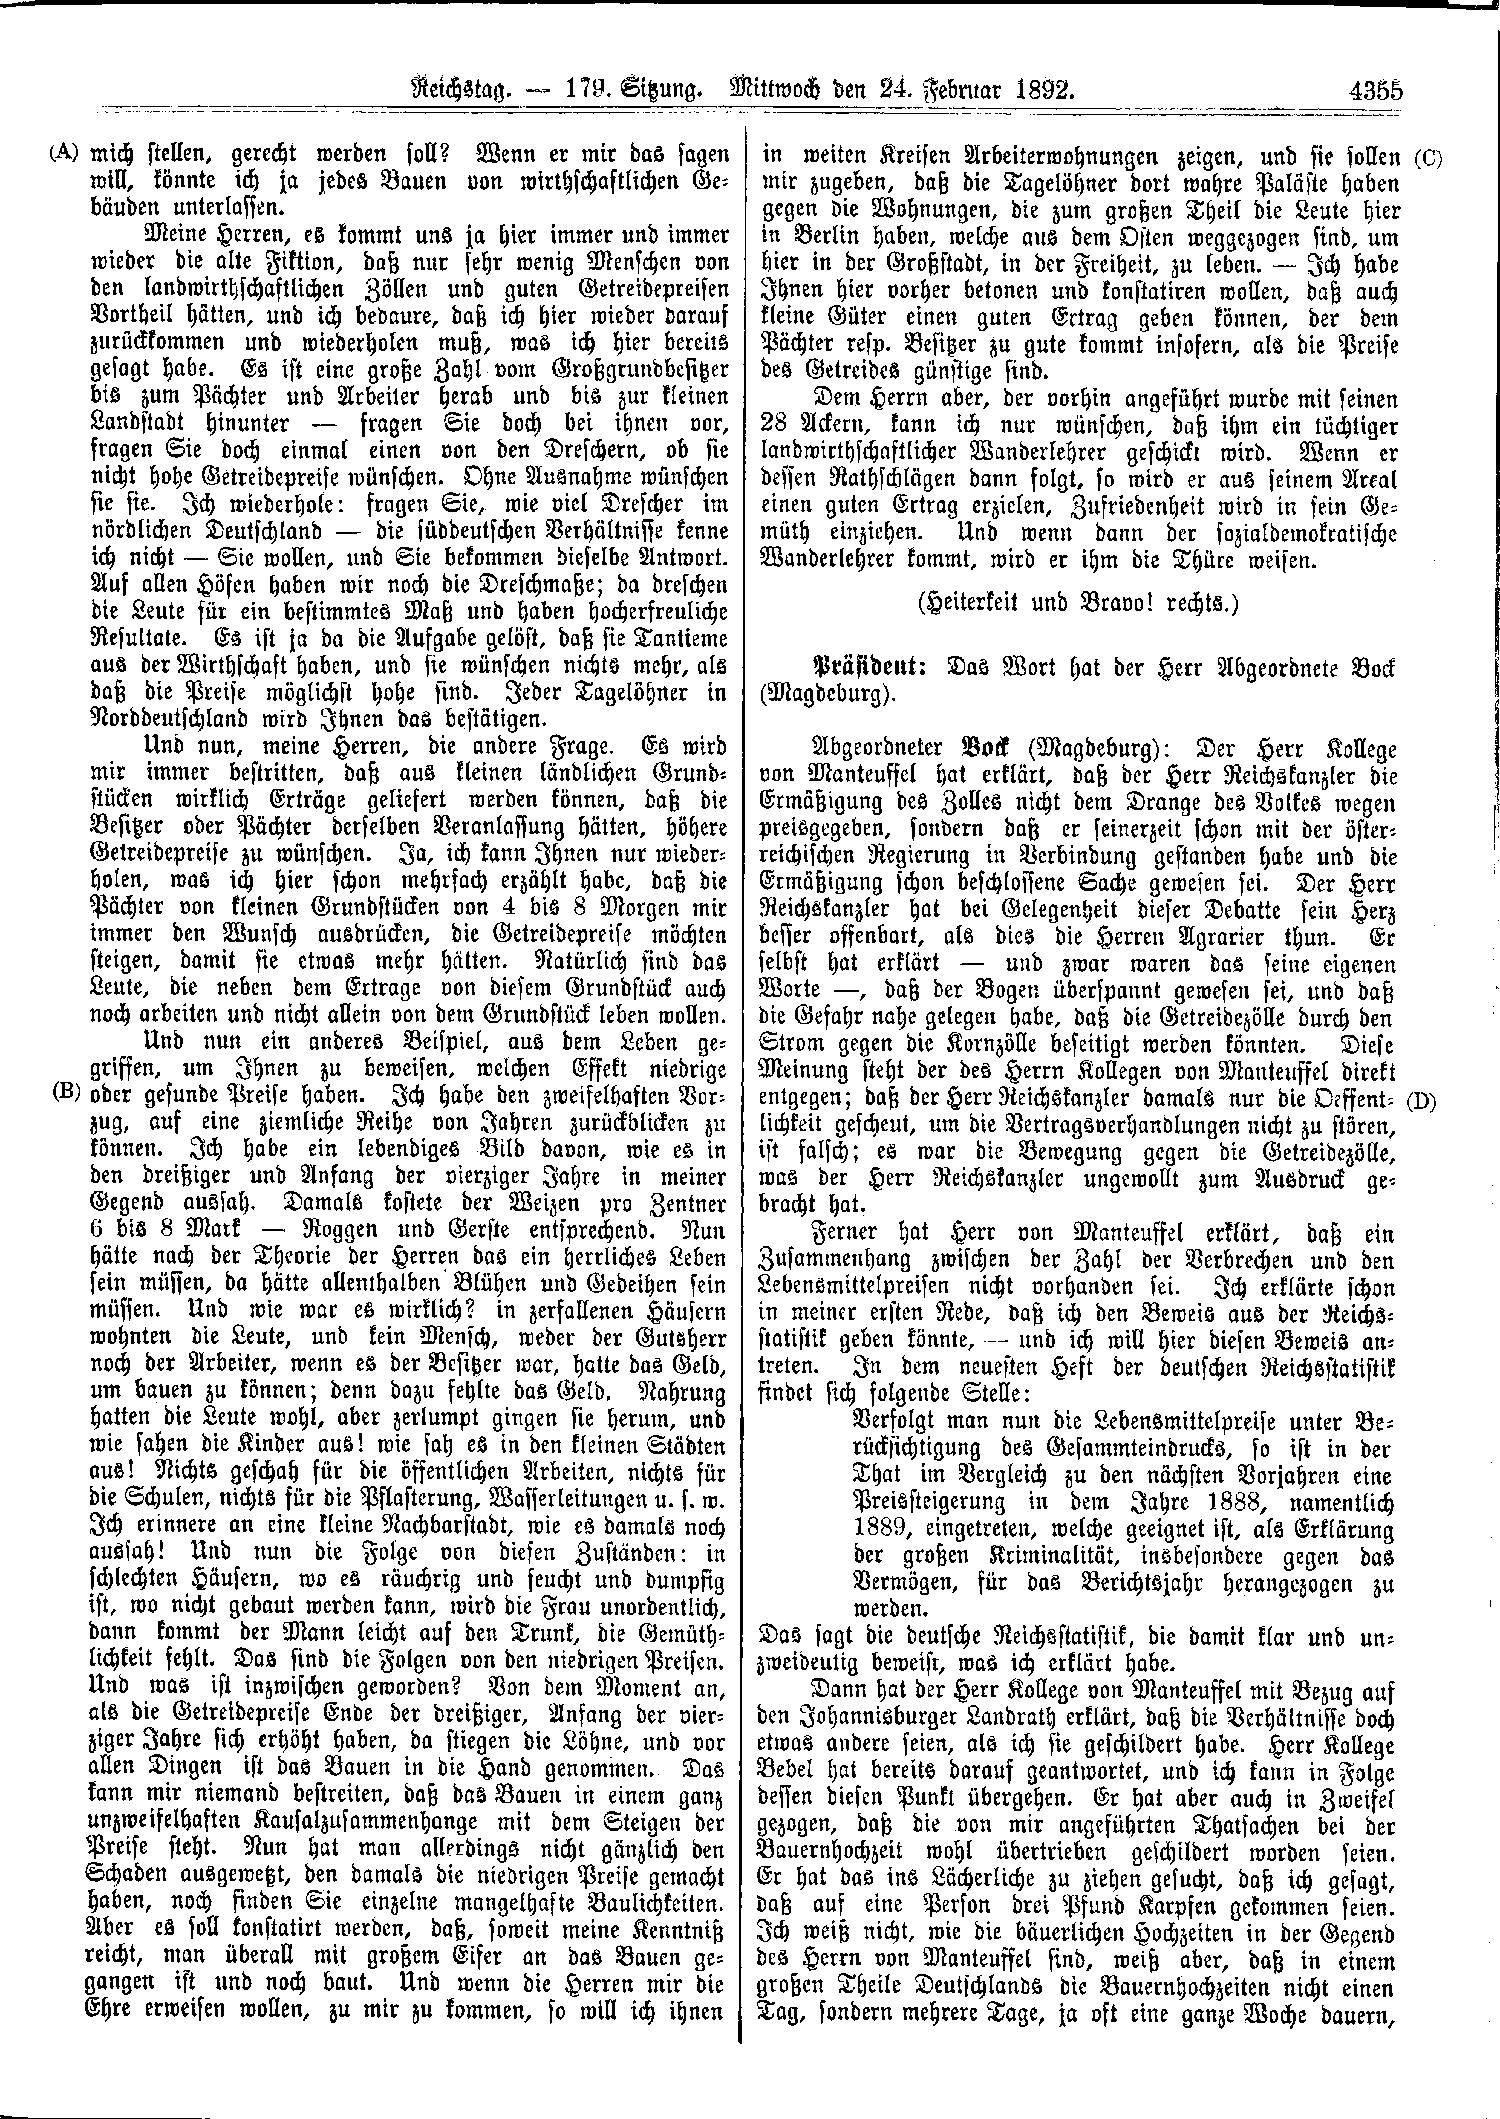 Scan of page 4355